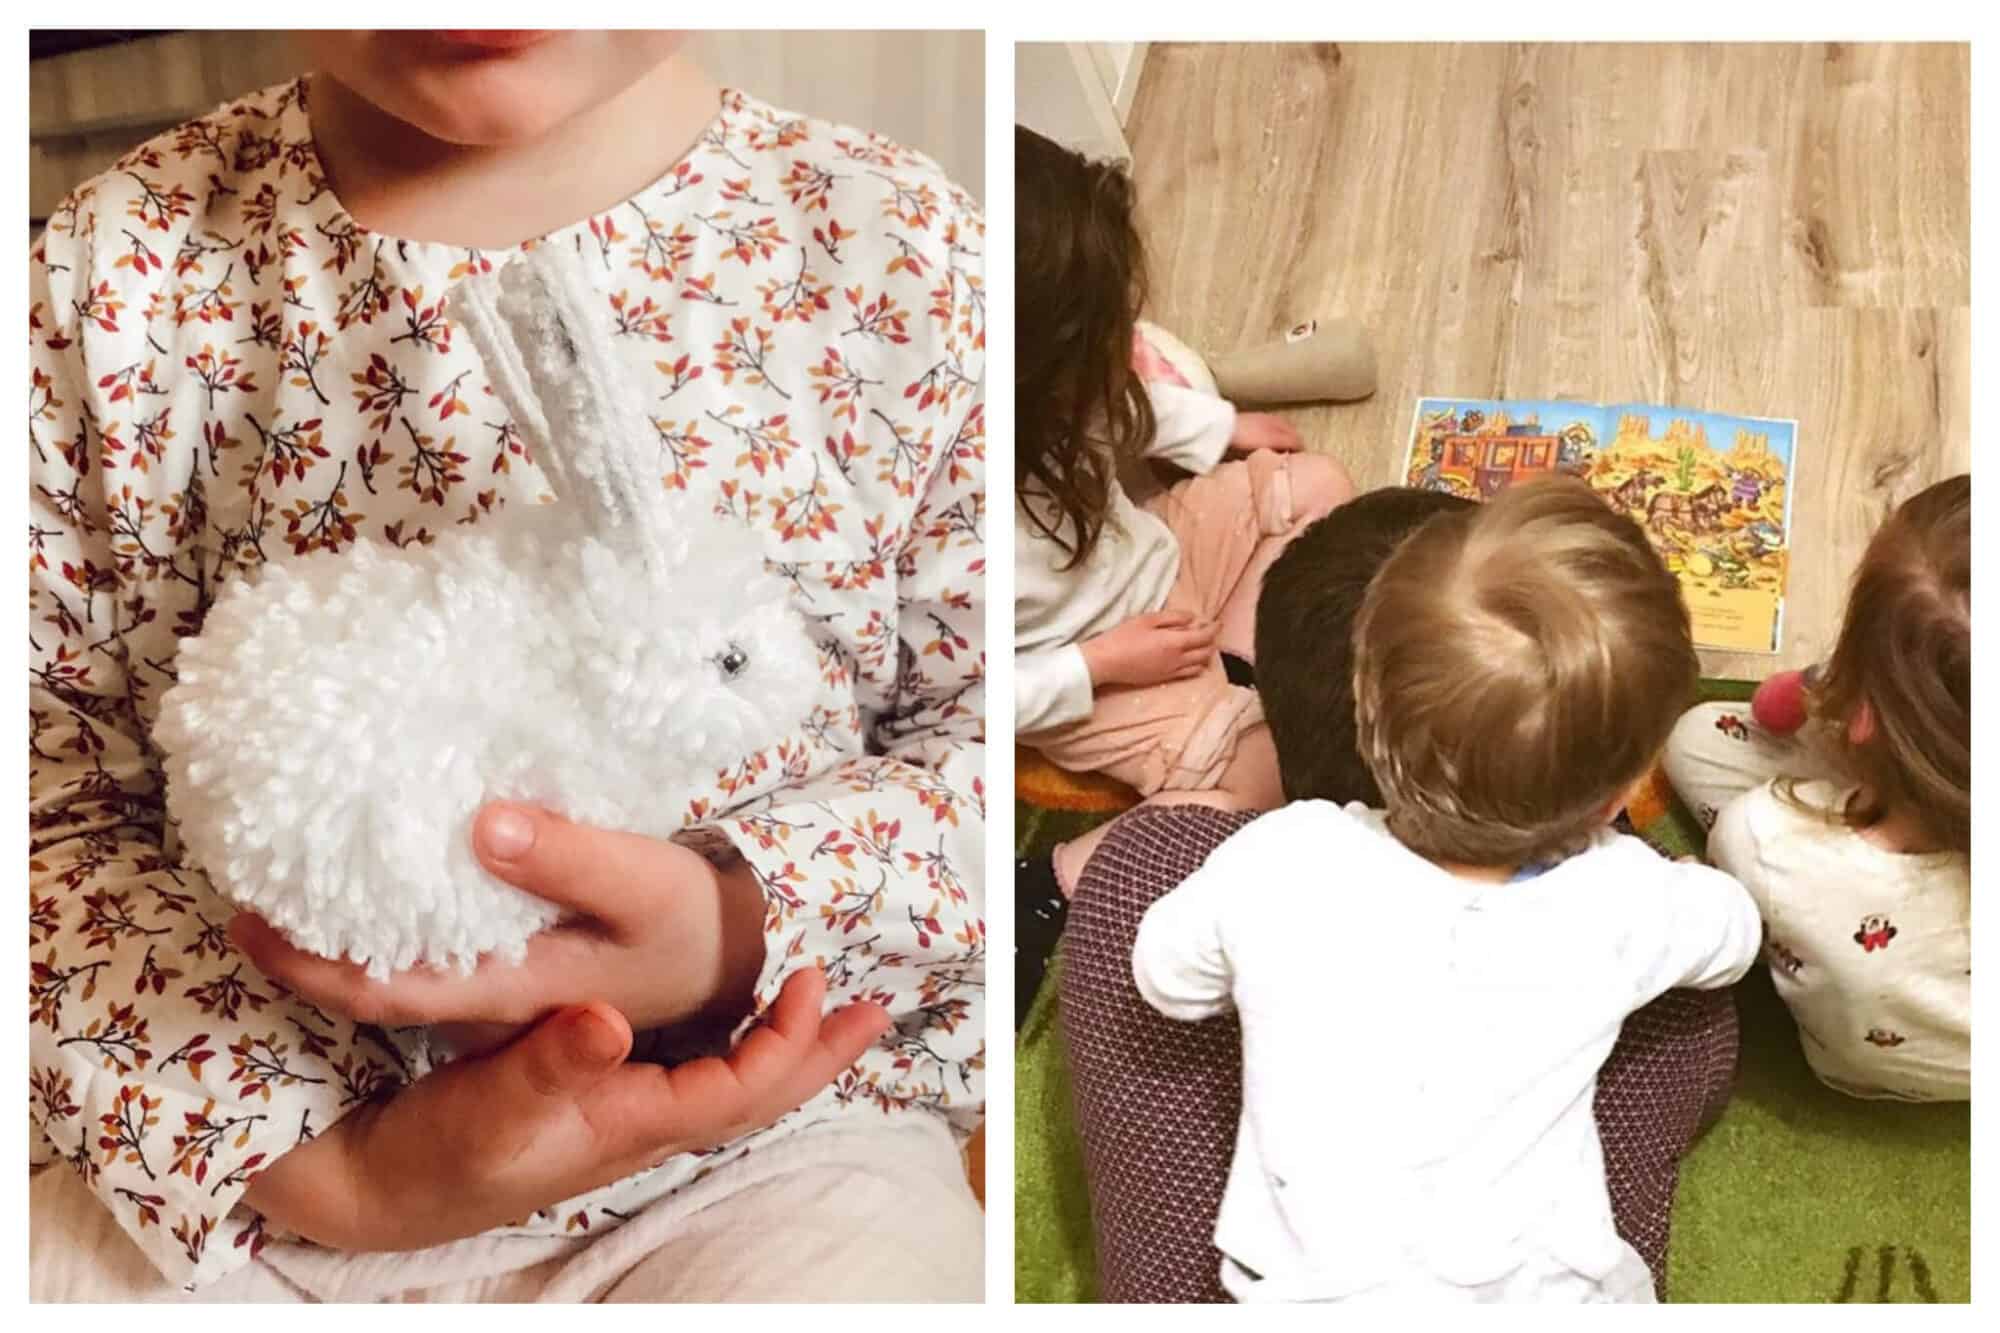 Left: A child holds a white stuffed animal rabbit in their hands, Right: A person reads a story to three children who are on top and around him.